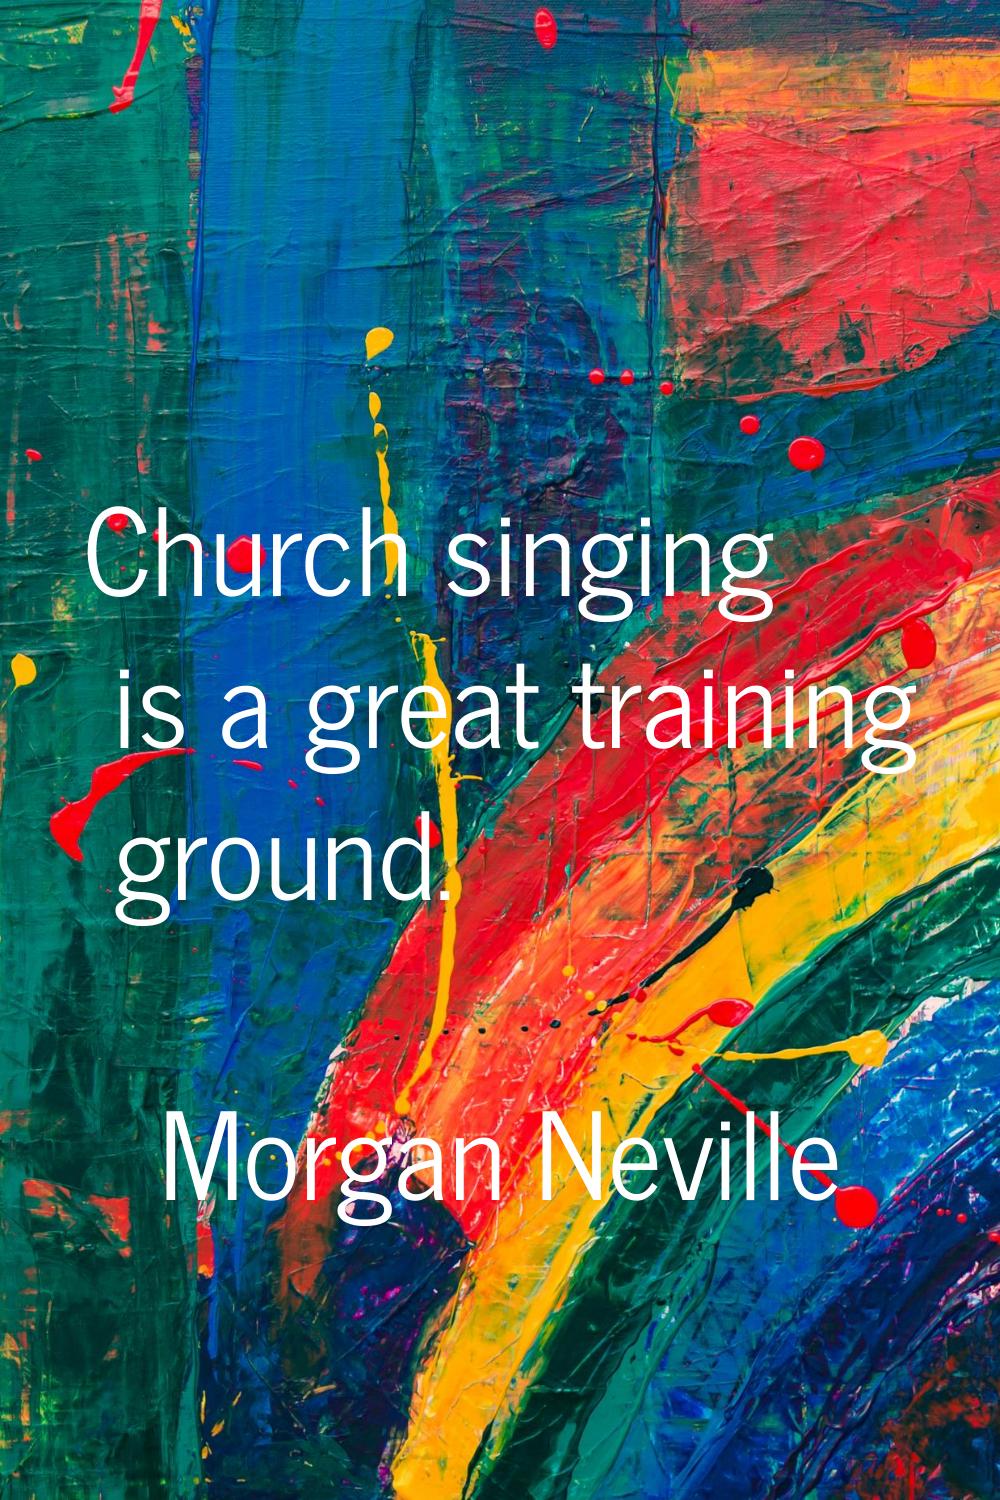 Church singing is a great training ground.